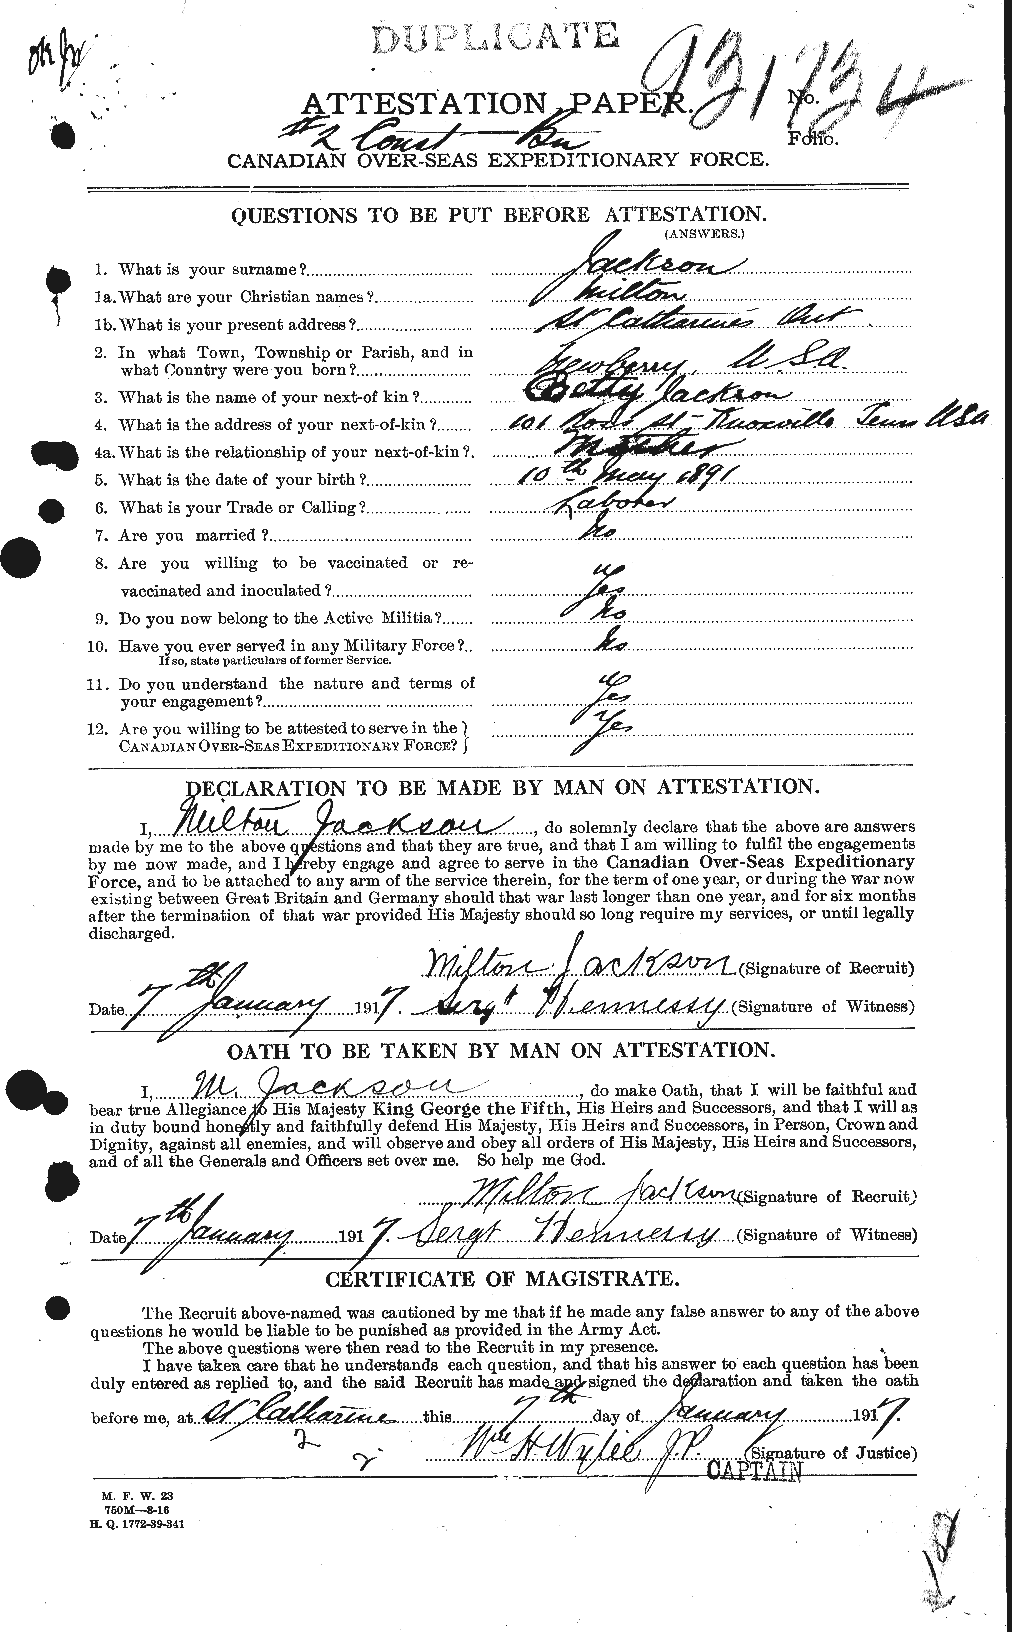 Personnel Records of the First World War - CEF 414432a